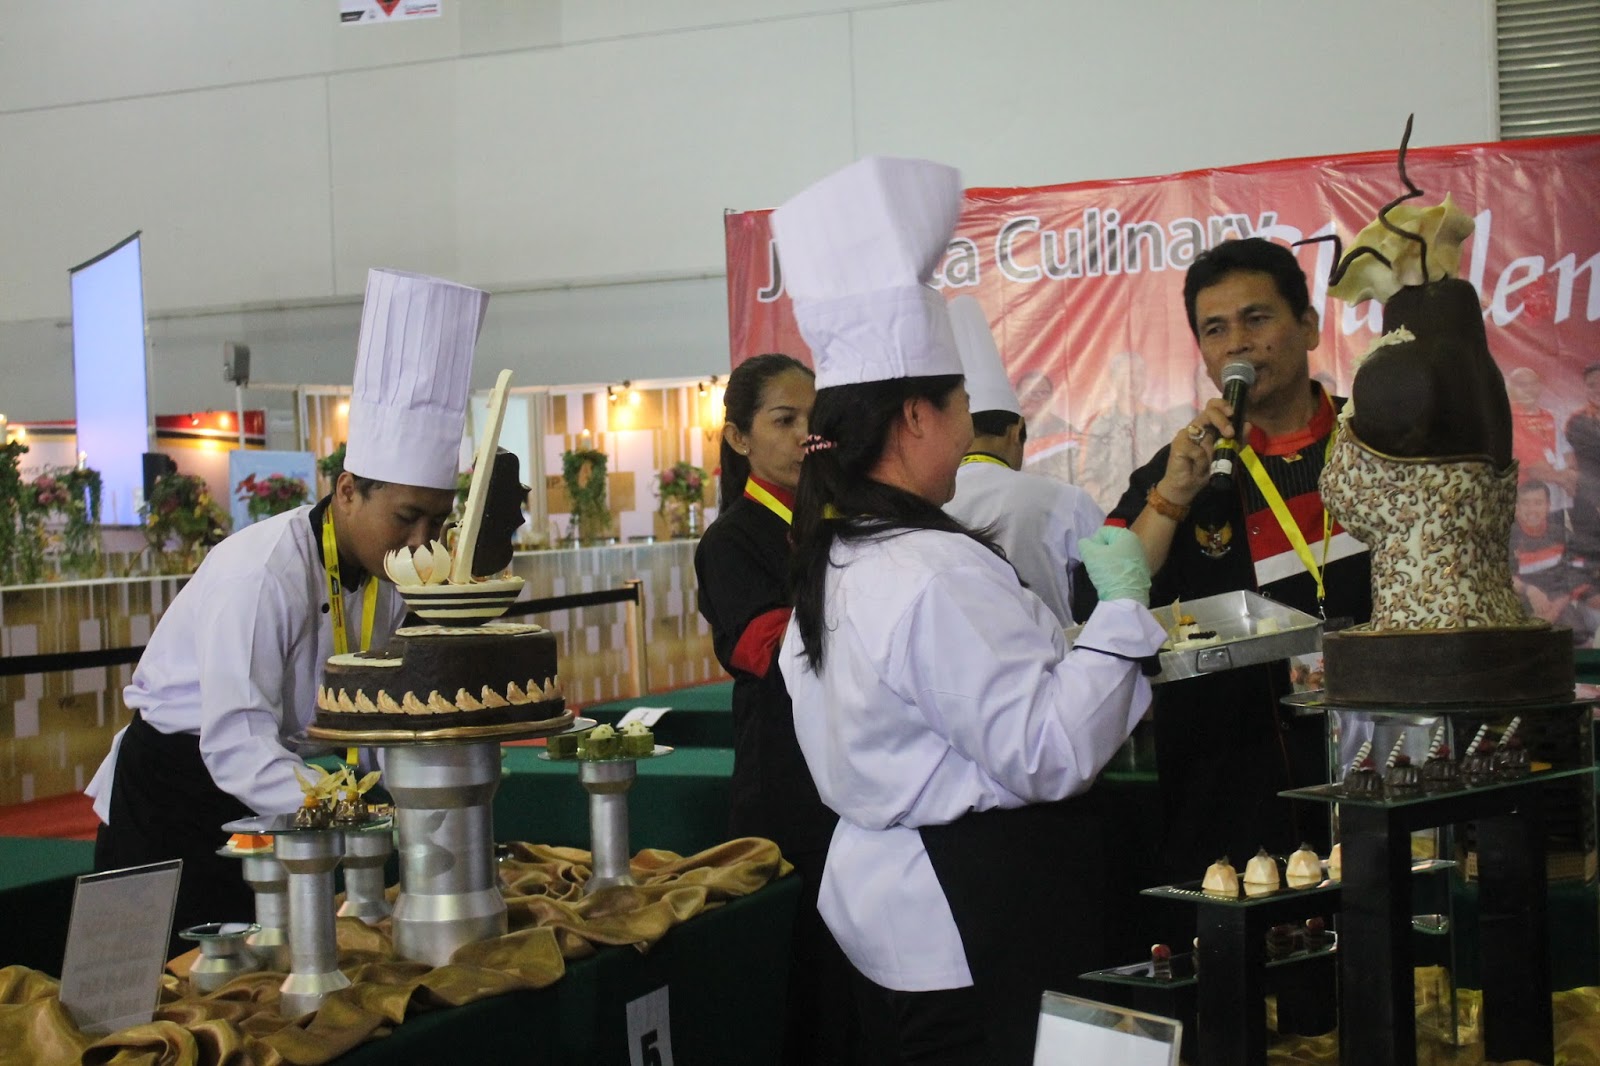 Cooks competition